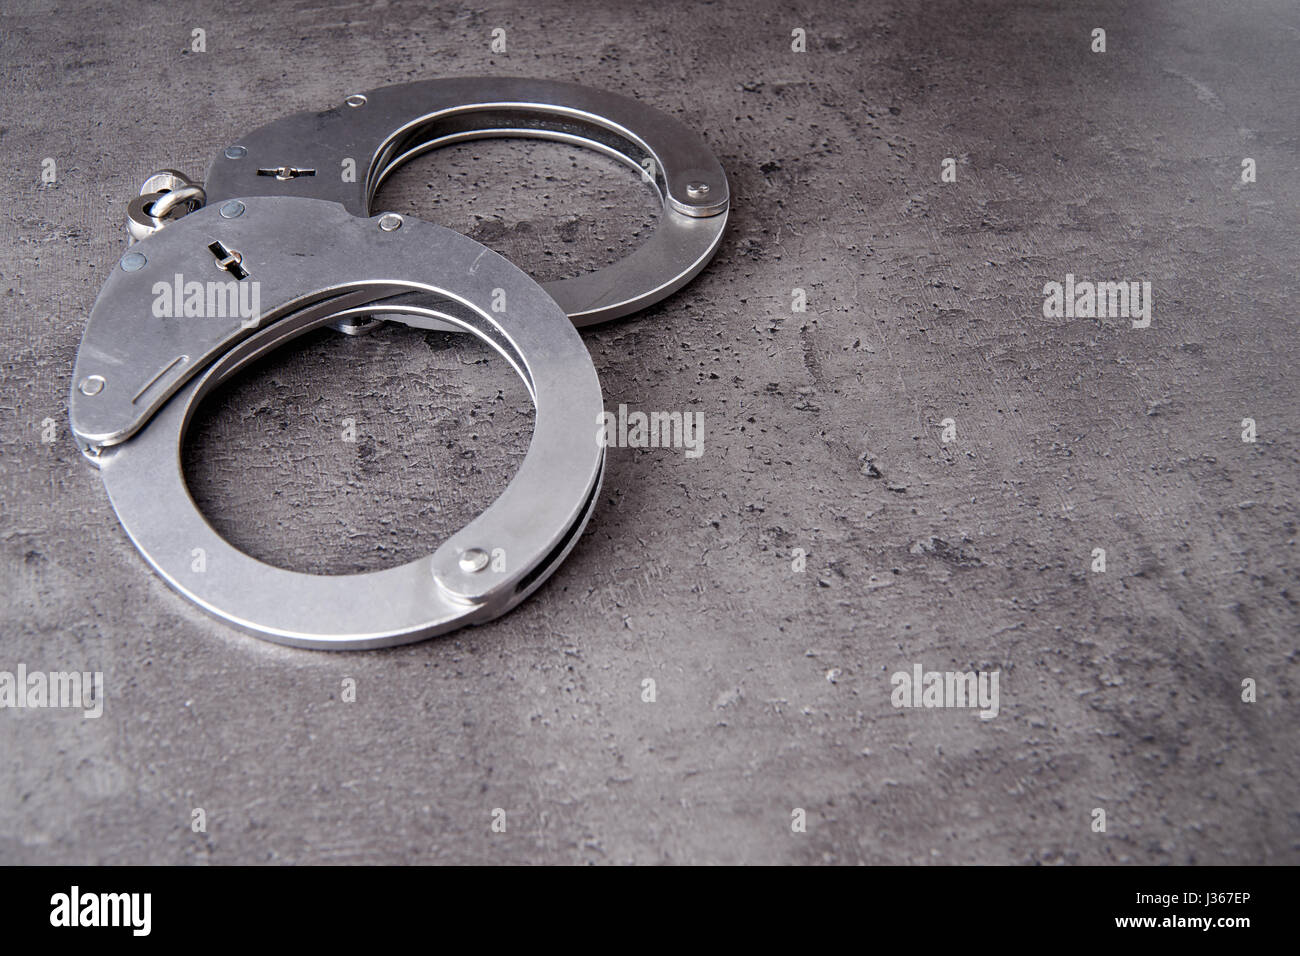 German police handcuffs on rough grey background with copy space. Stock Photo